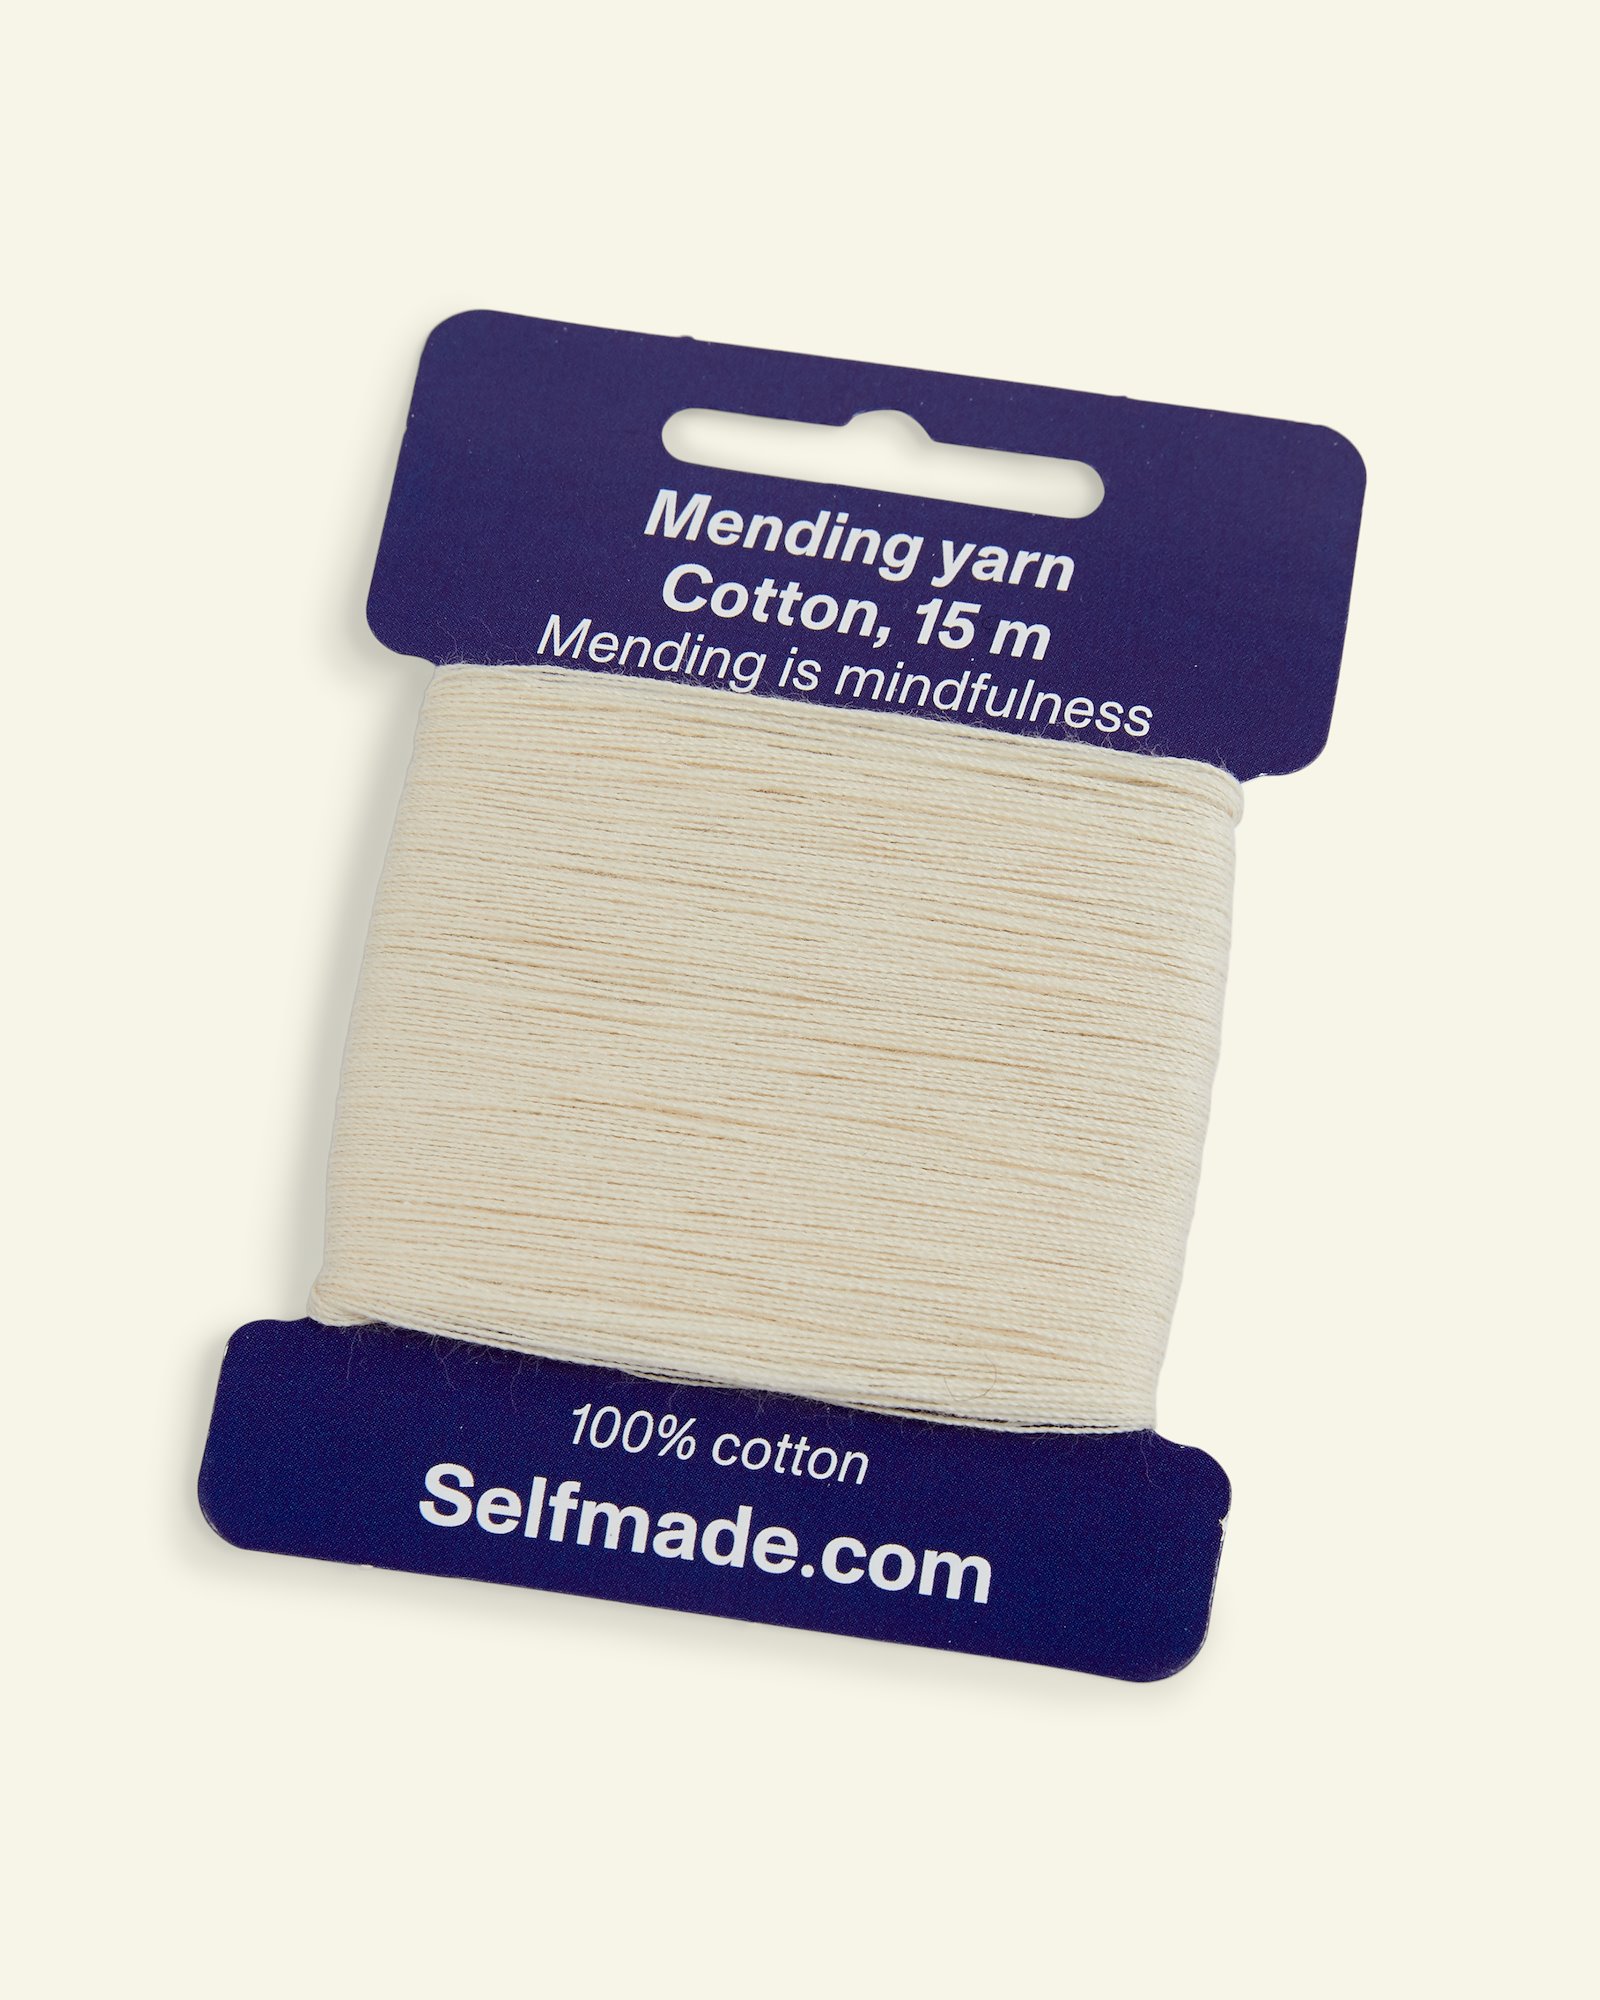 Mending yarn cotton off white 15m 35551_pack